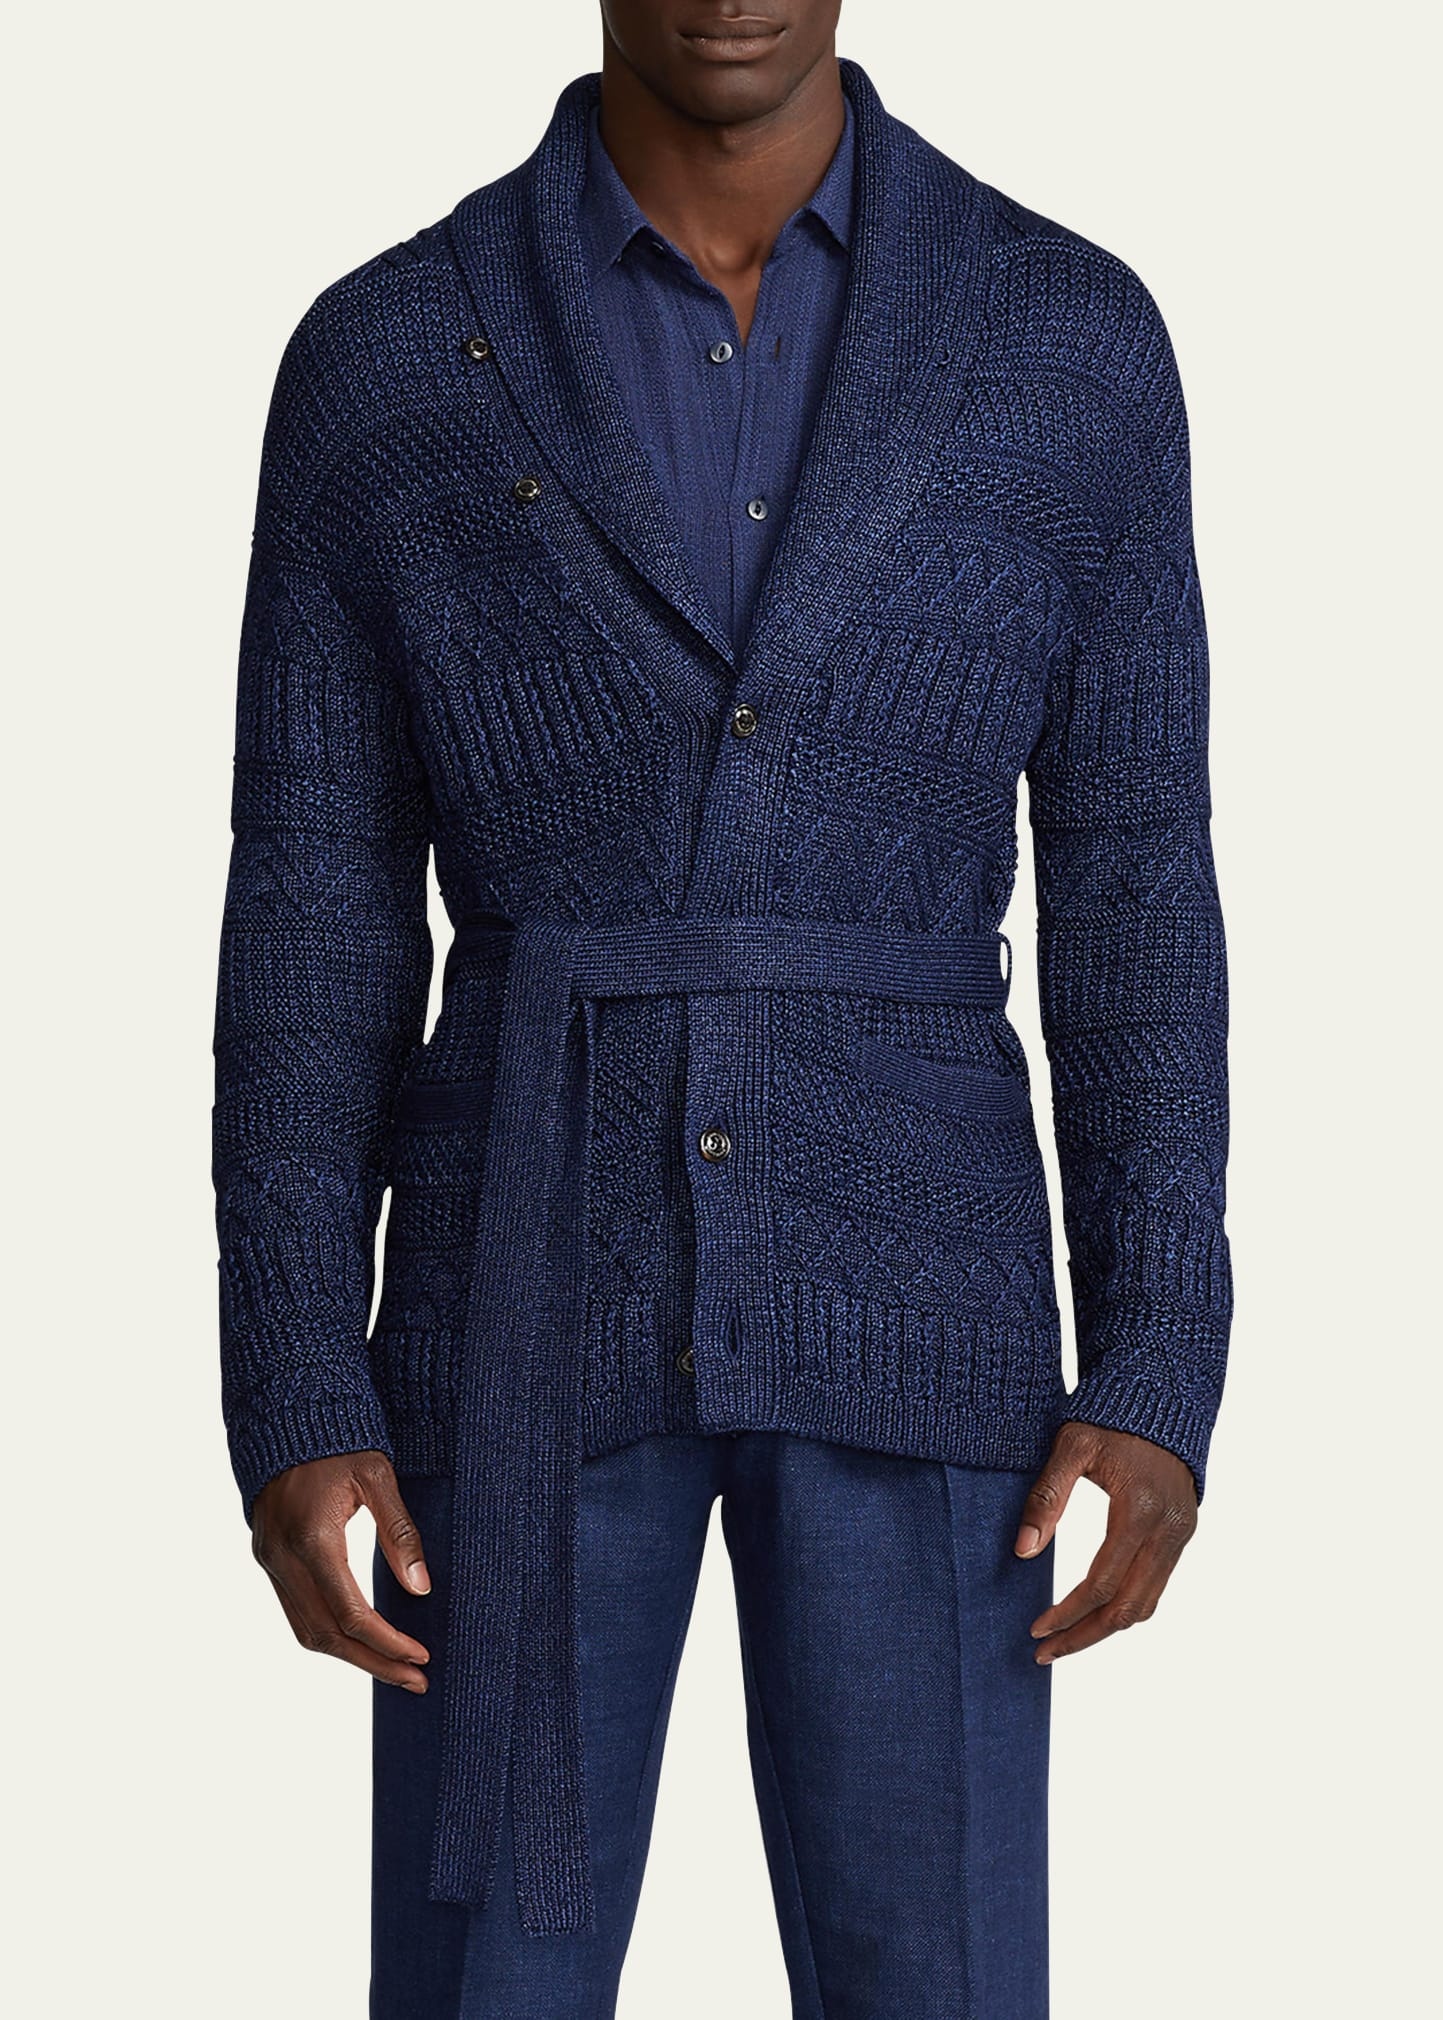 Men's Textured Knit Belted Cardigan - 4